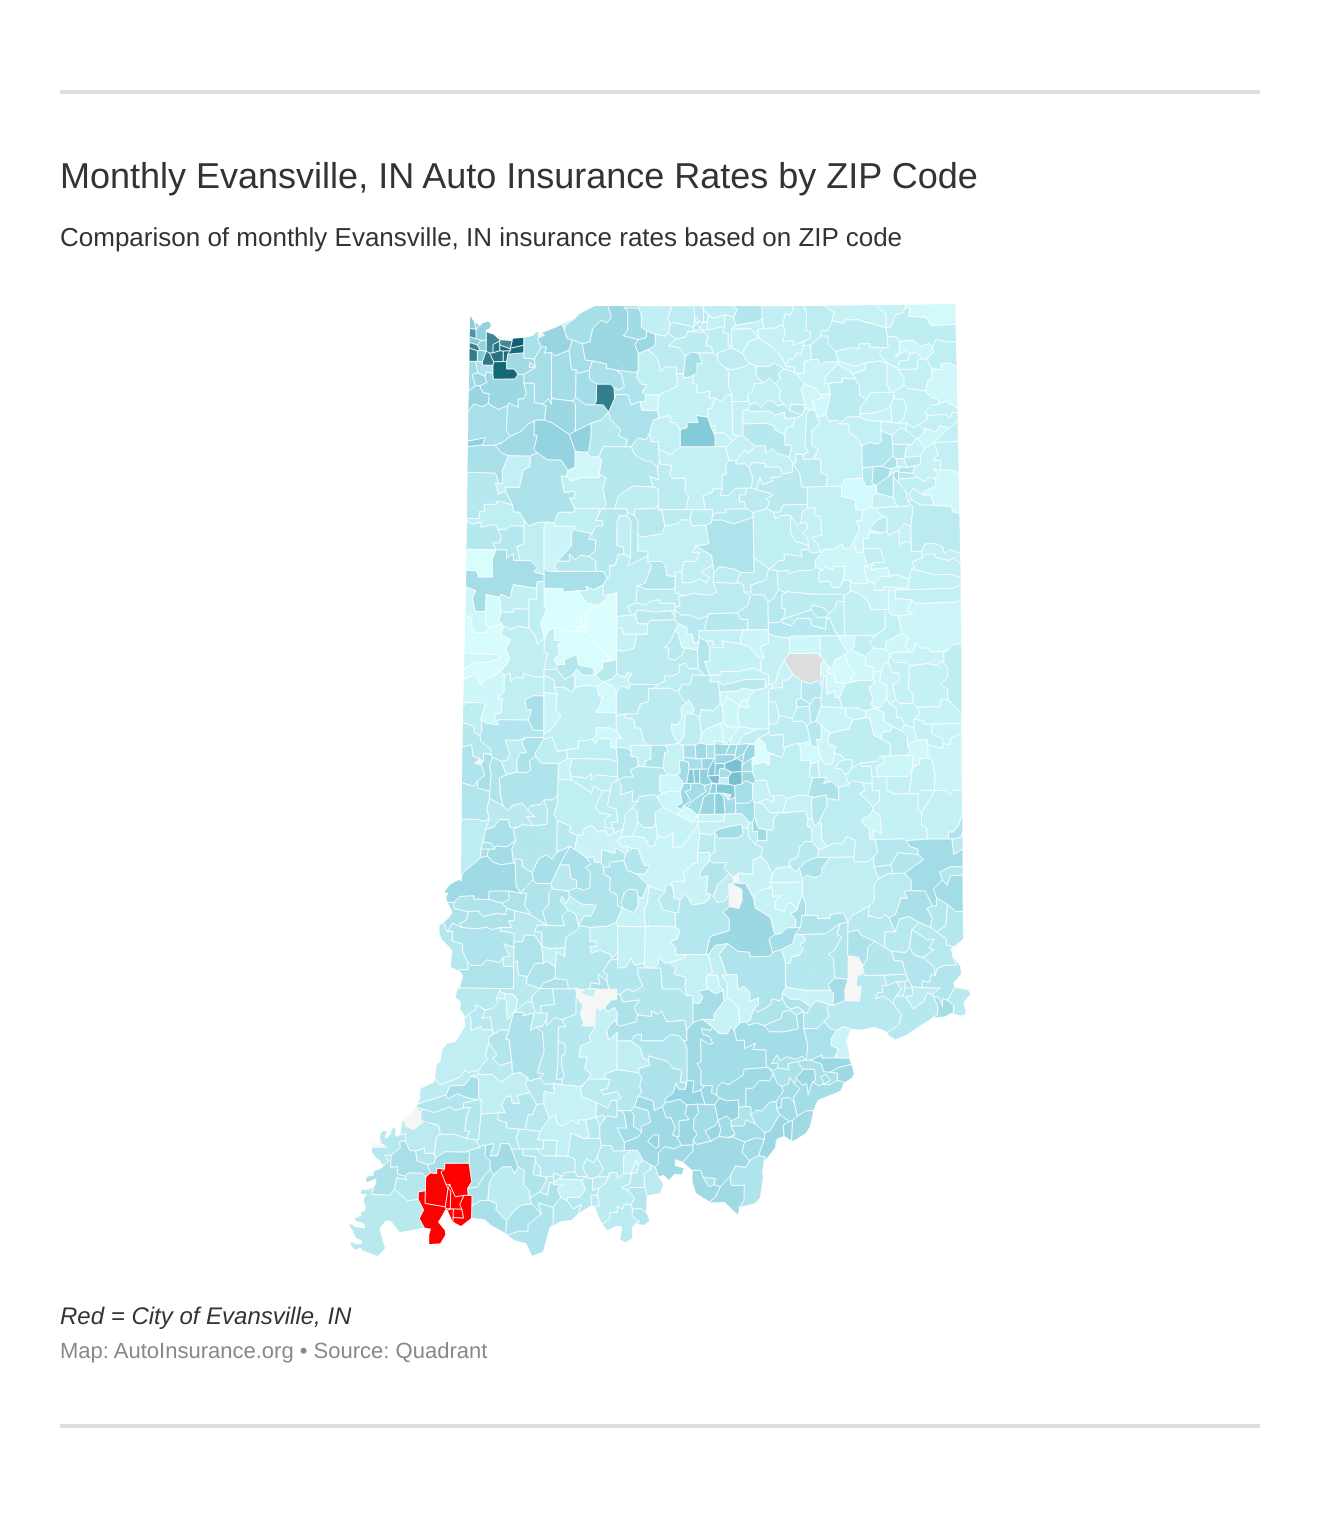 Monthly Evansville, IN Auto Insurance Rates by ZIP Code